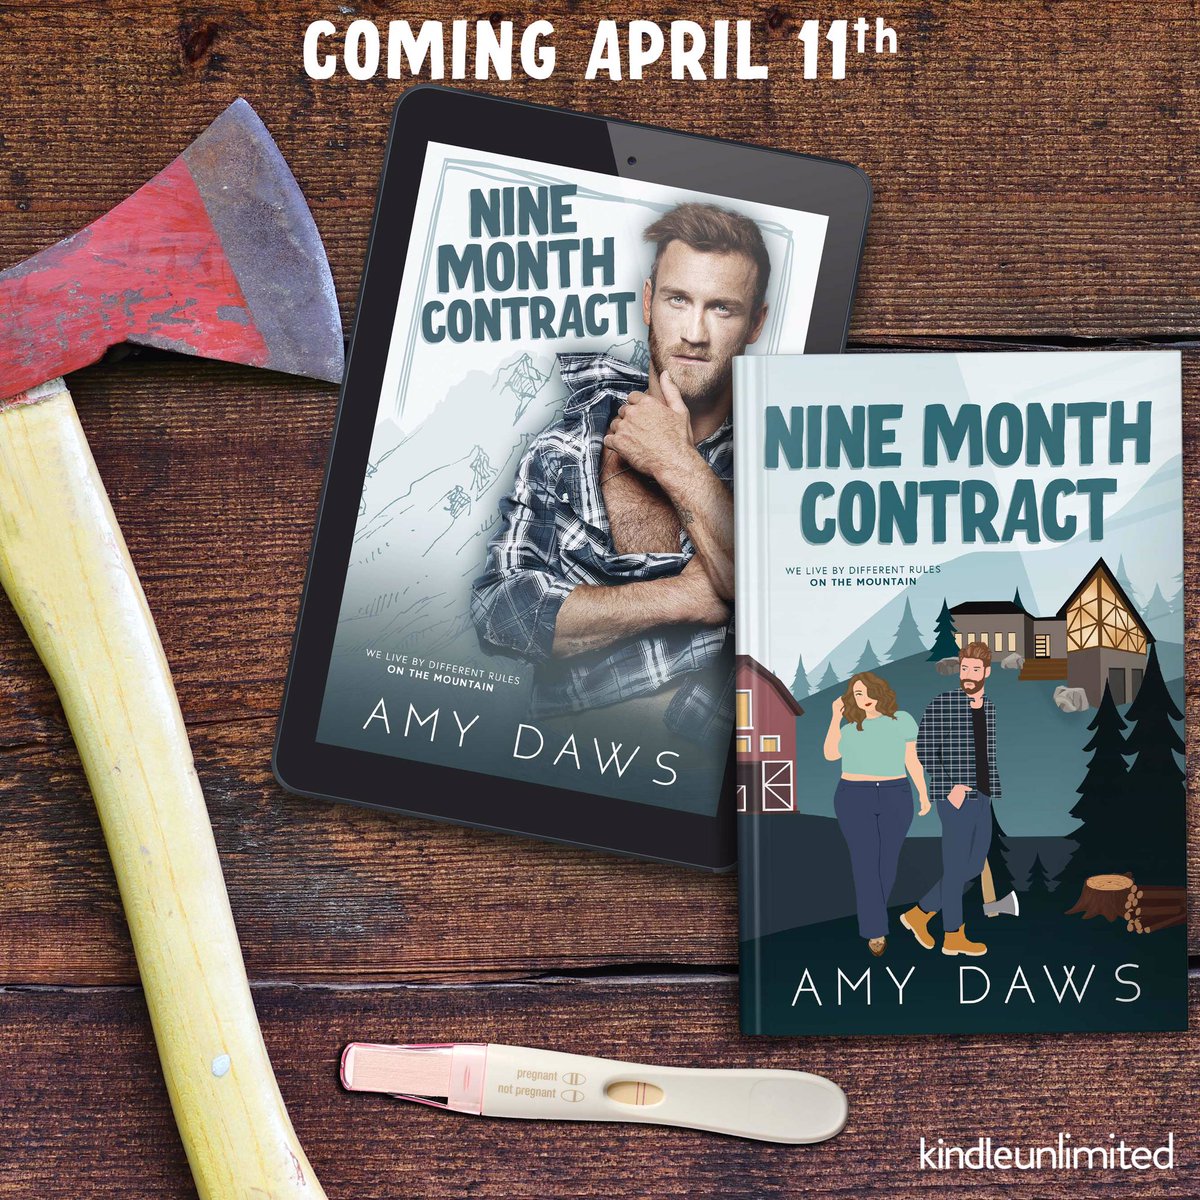 We live by different rules on the mountain… Happy Double Cover Reveal to @amydawsauthor !! We can't wait for Nine Month Contract coming April 11th! Preorder now→ geni.us/NineMonthContr… #GrumpySunshineromance #SmallTownRomance #plussizedheroine #romcom #standalone #coverreveal